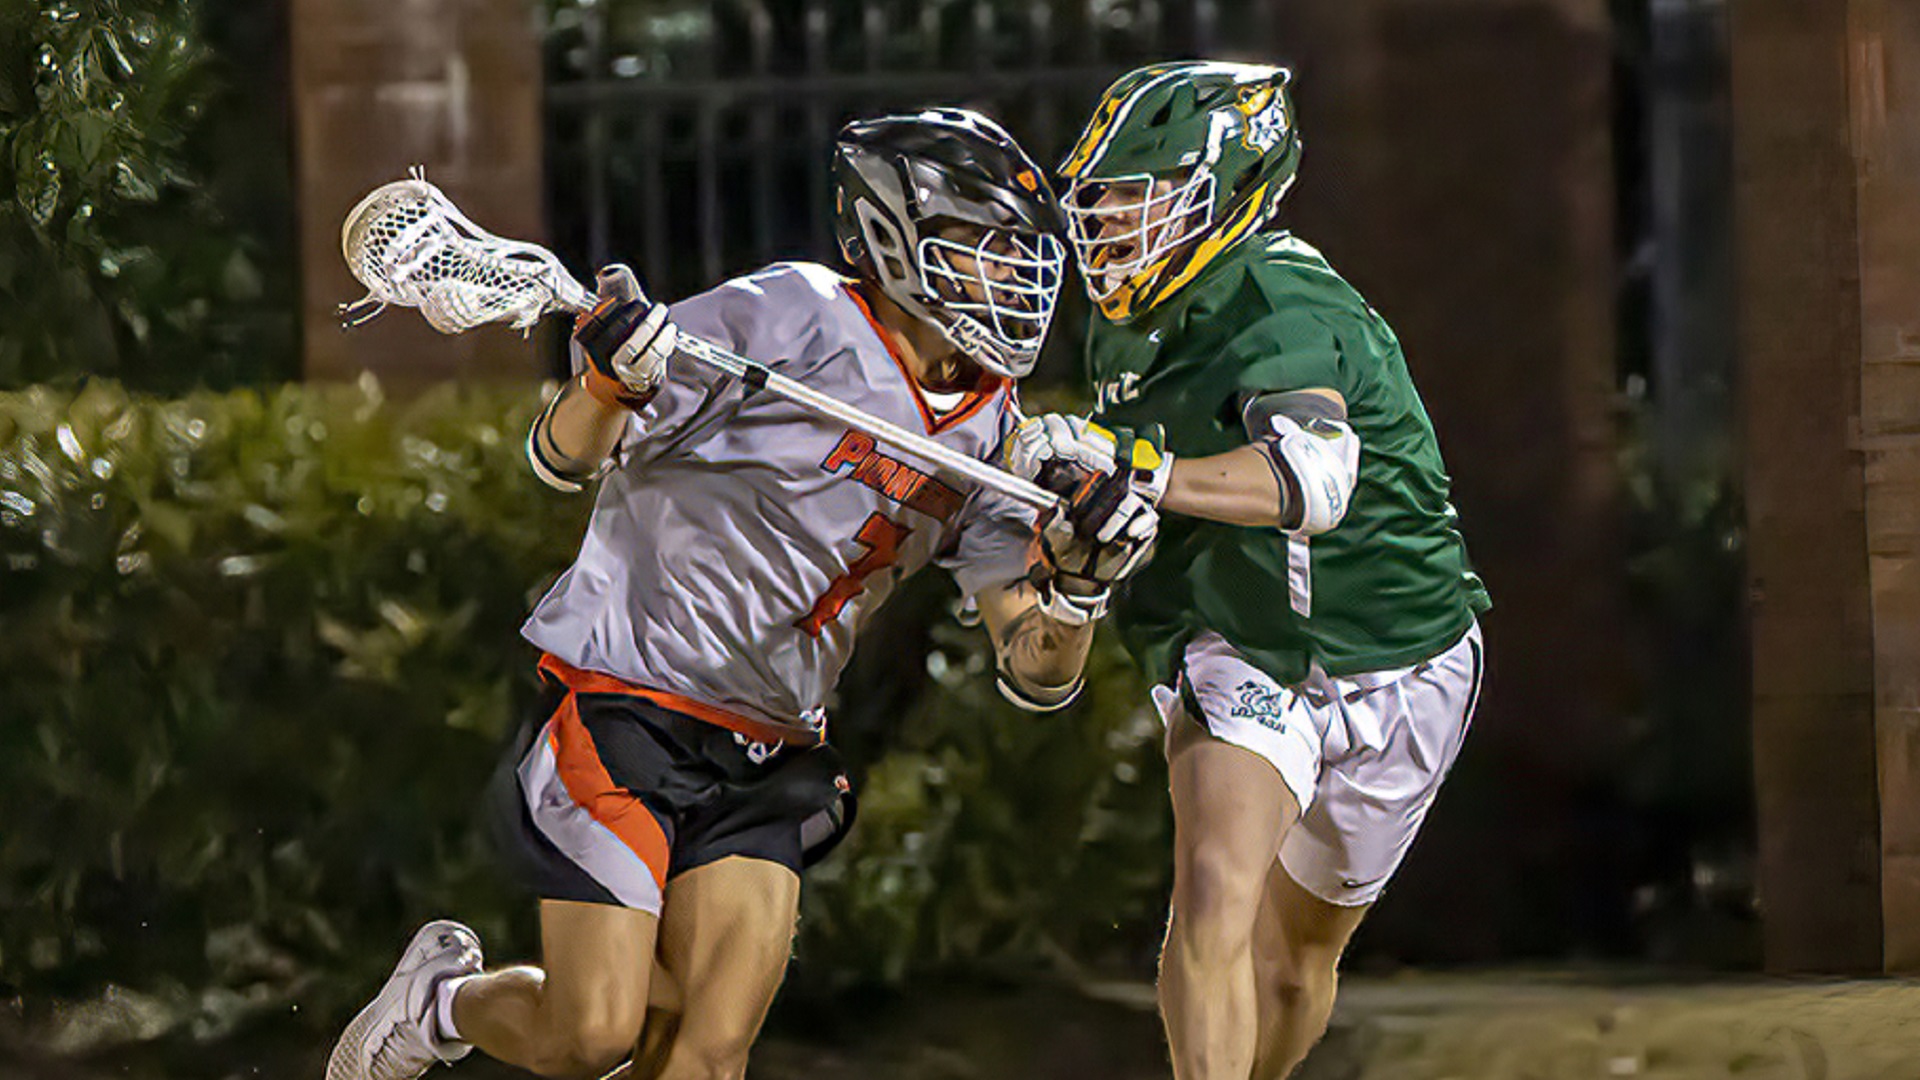 Lorenz Brown scored five goals and recorded a point in a school-record 20th straight game (photo by Chuck Williams)